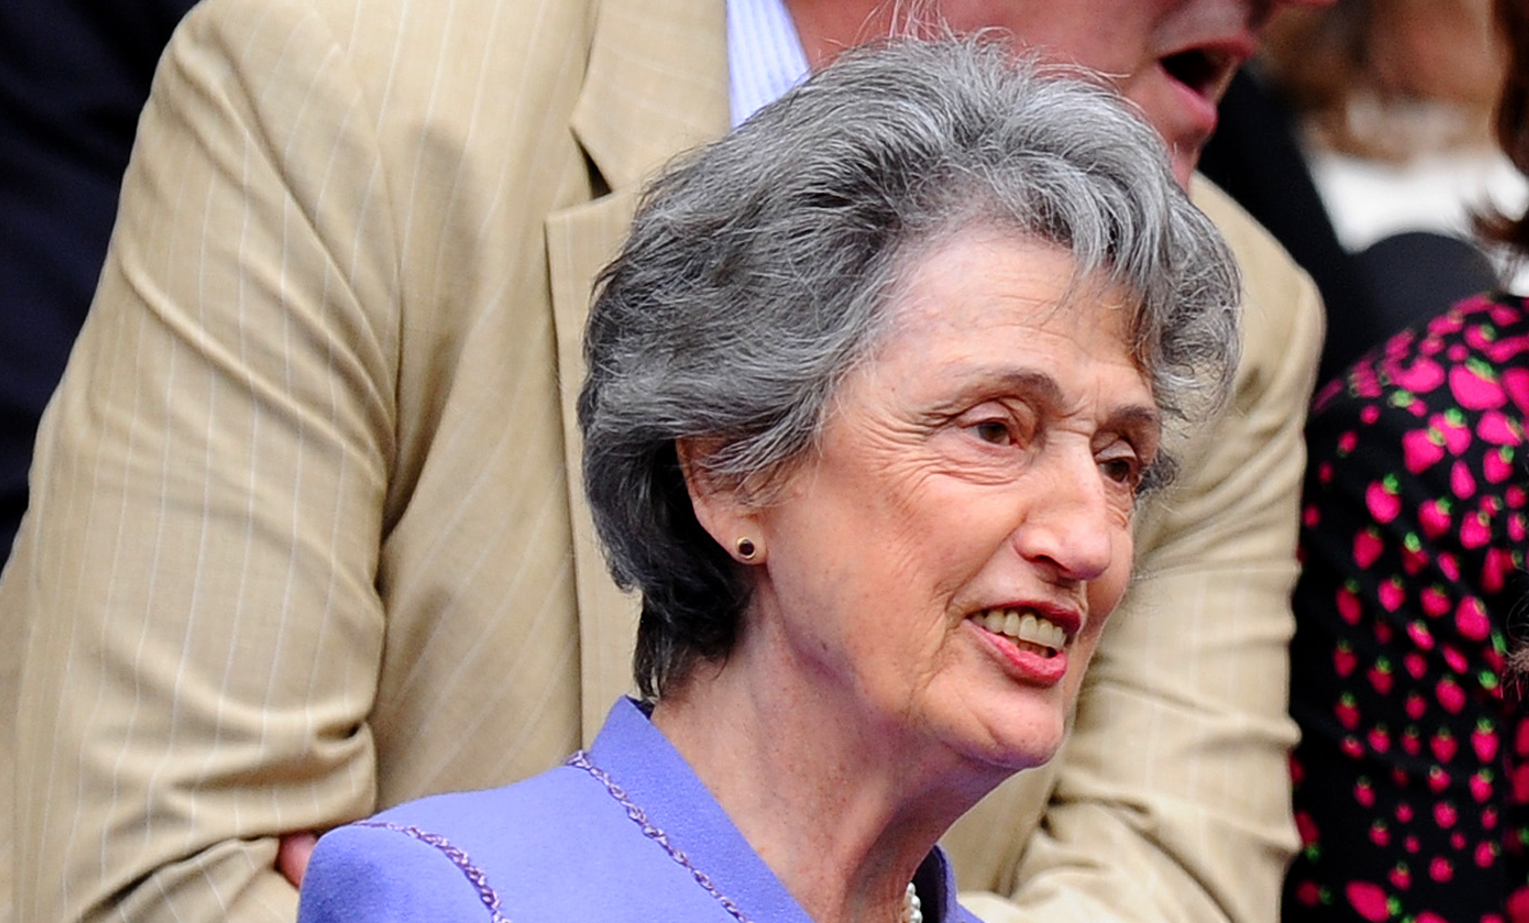 Last month, the palace disowned 83-year-old retainer Lady Susan Hussey over her racist behaviour